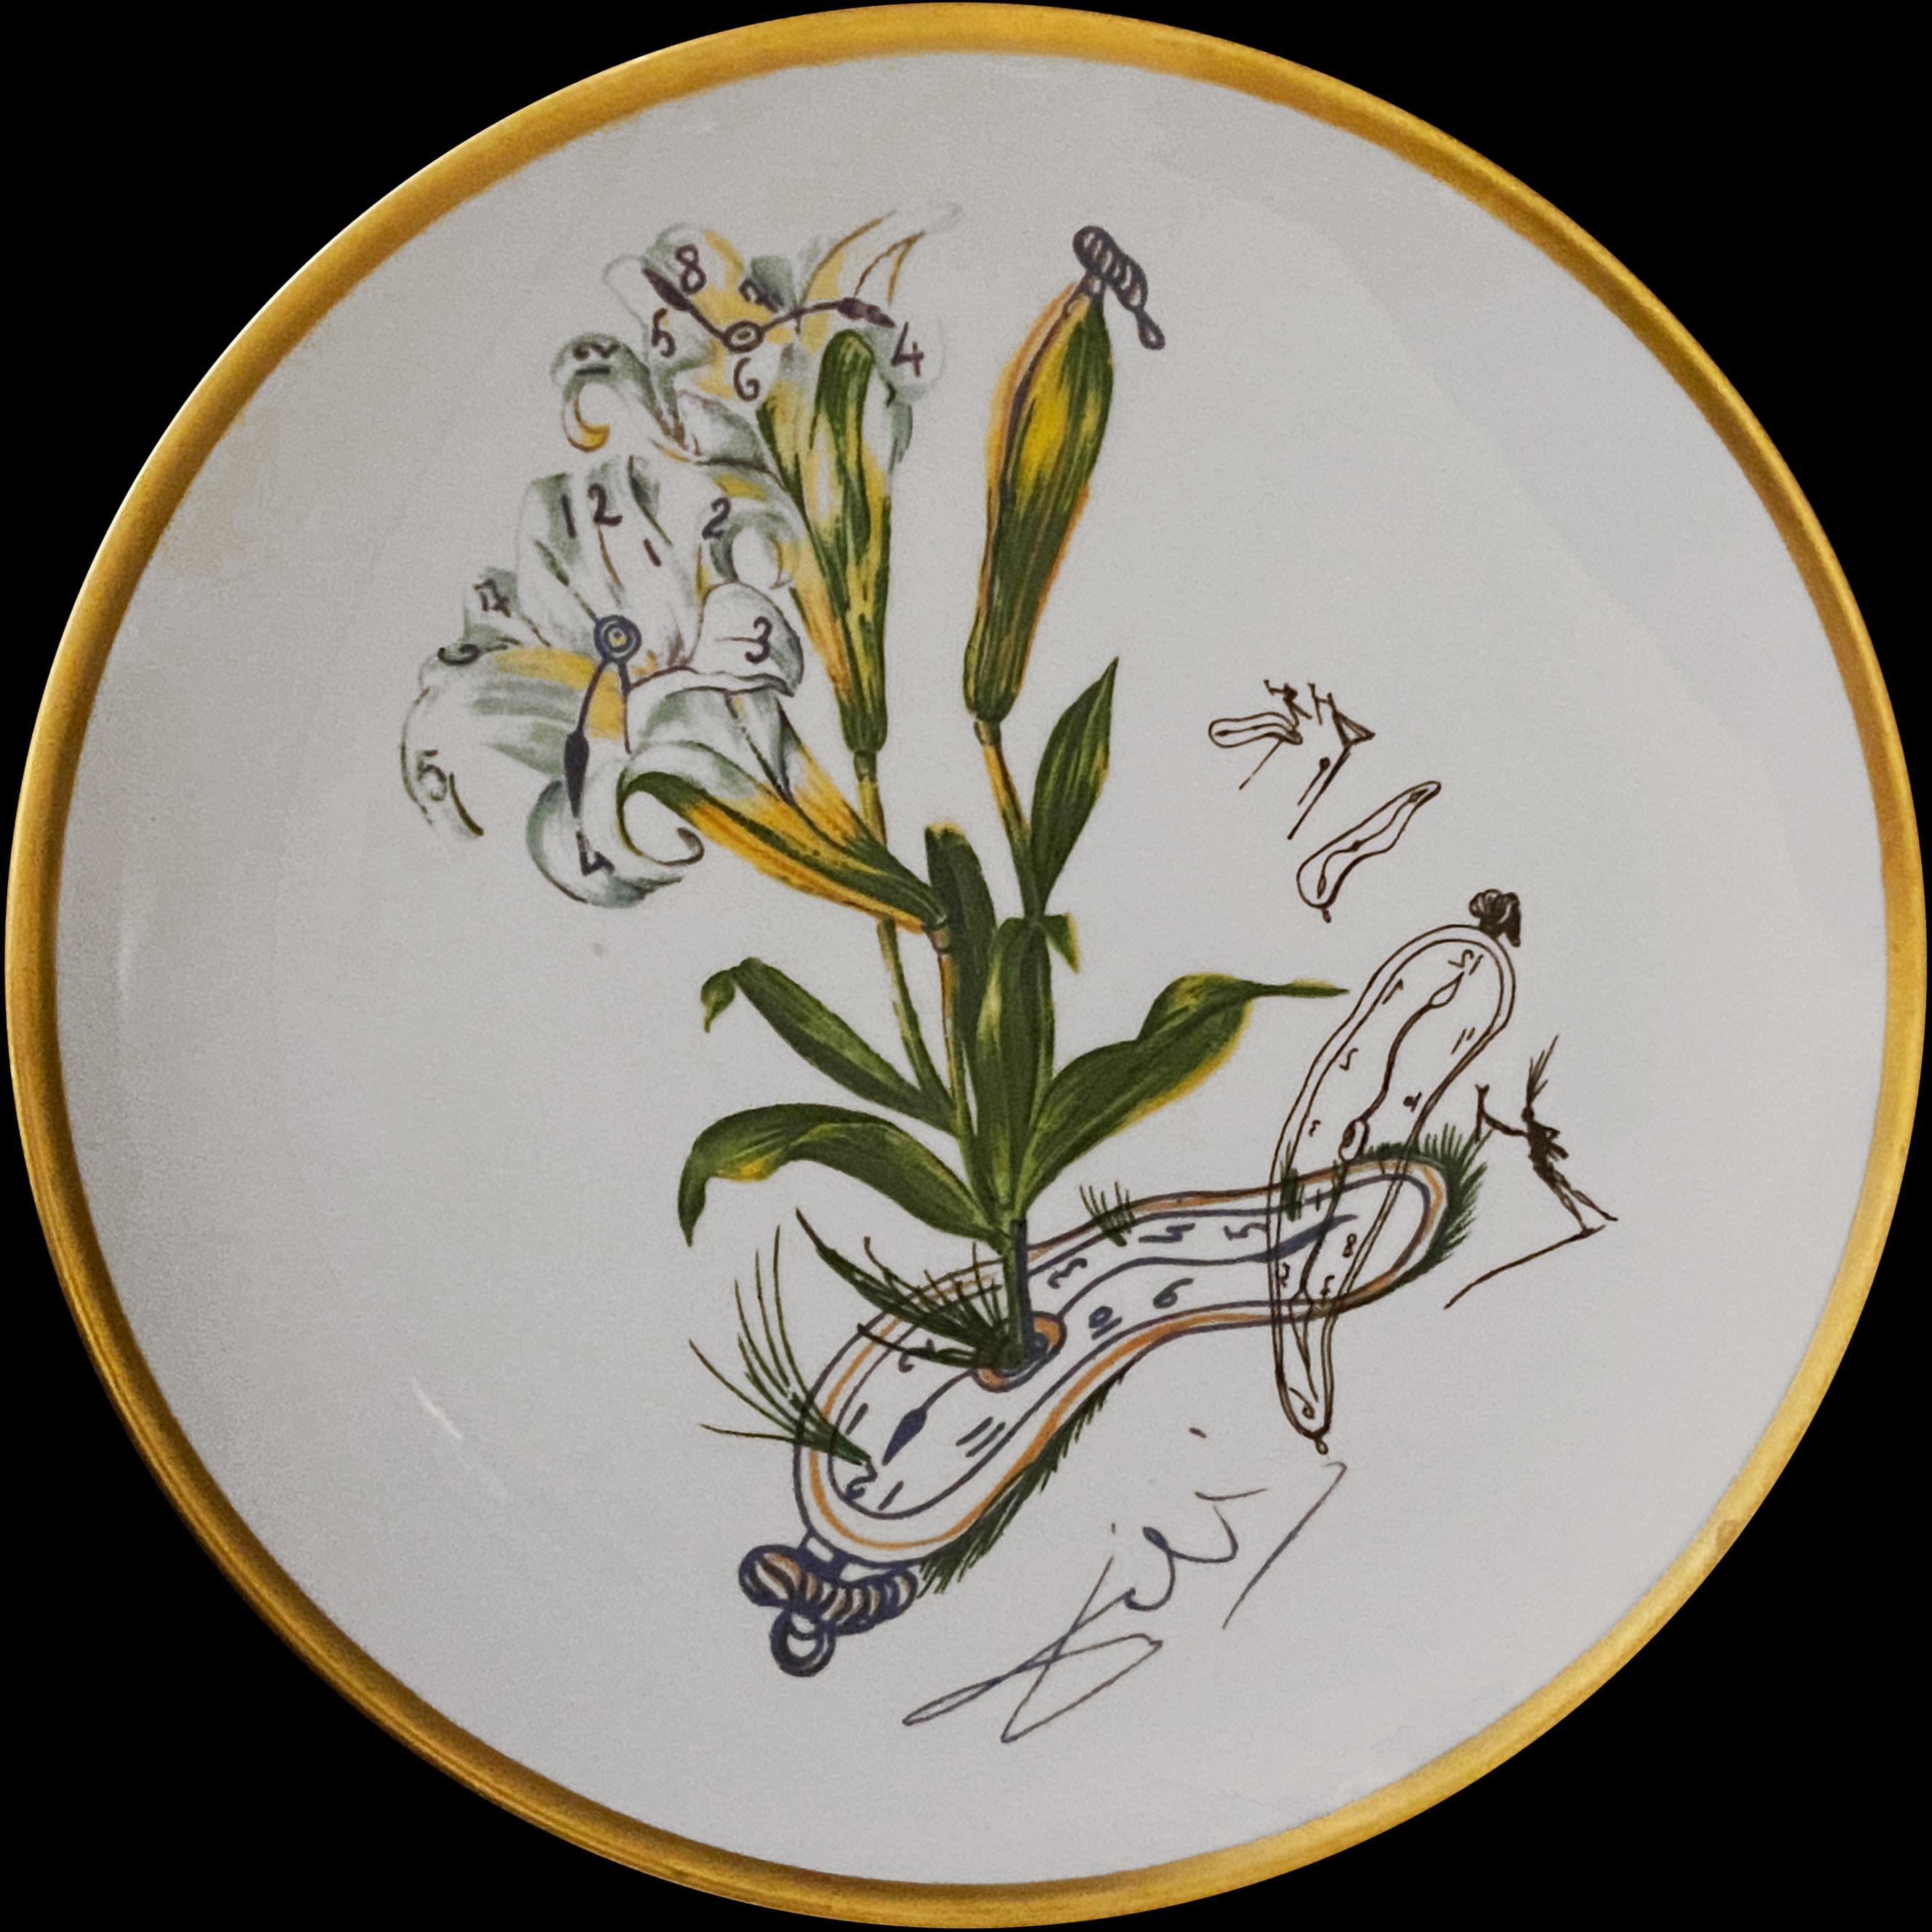 Genious Dali 1904-1989, world-famous Spanish Surrealist artist, in the design of these dessert porcelain plates diameter 18 cm, you will find some of his favorite items. Good printed quality with gold rim, very decorative.
Dali had an important